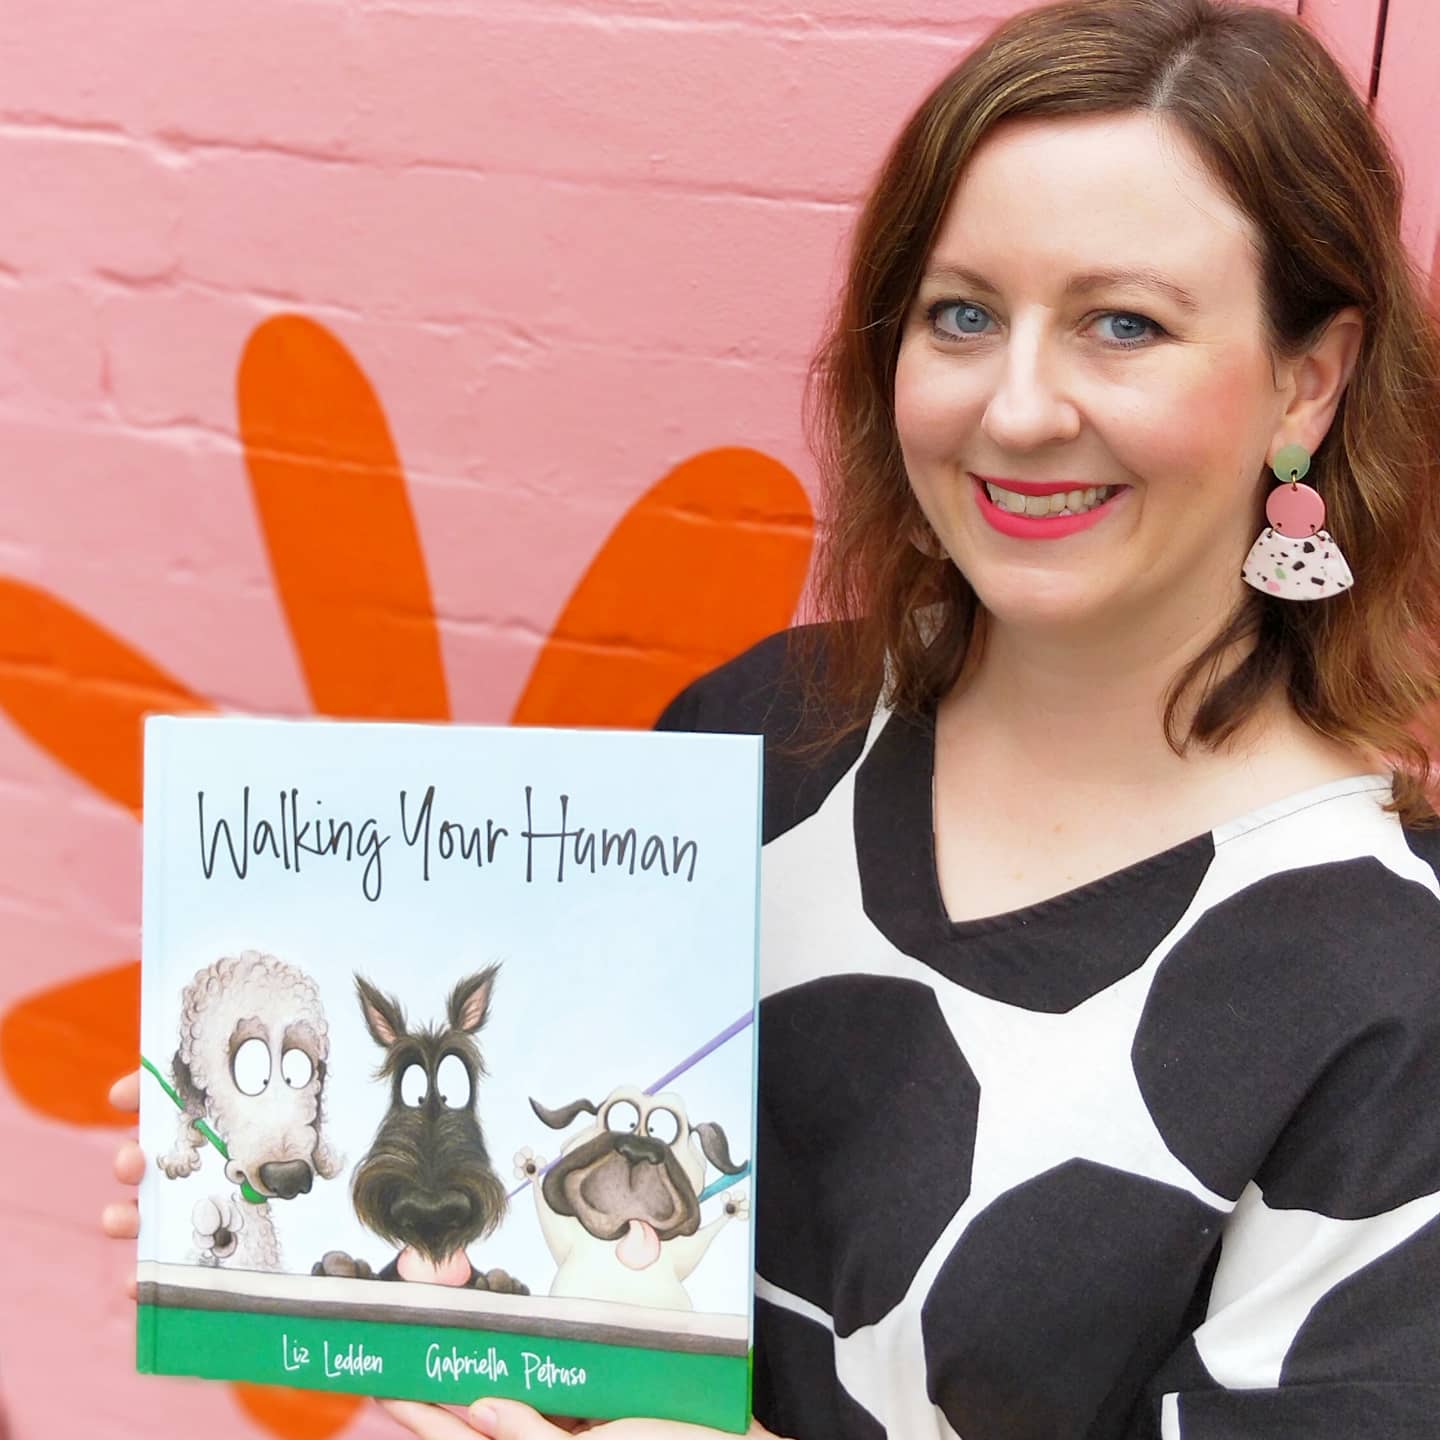 Liz Ledden holding her picture book - Walking Your Human